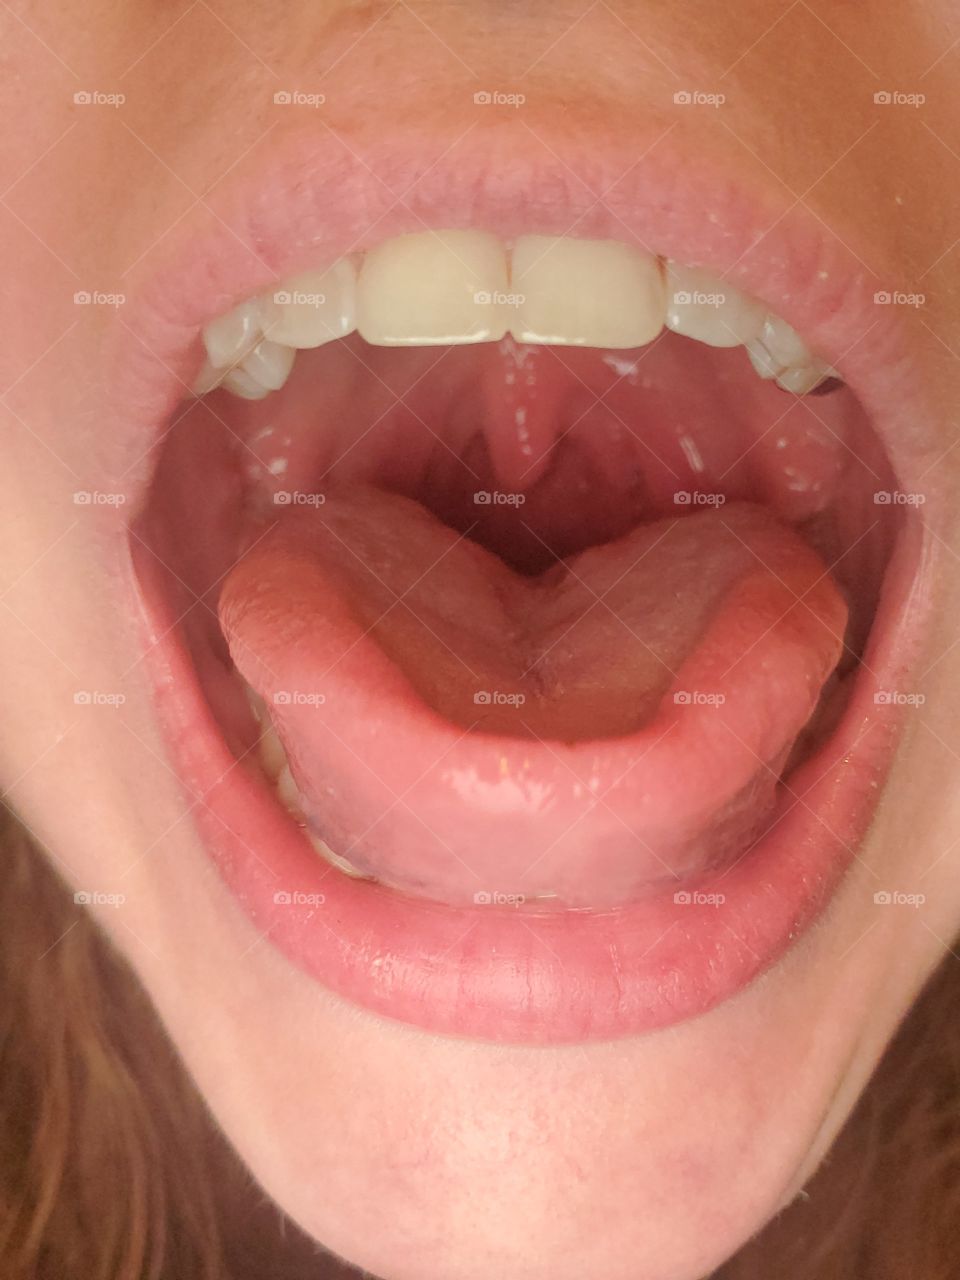 Mouth, Teeth, Throat, and Tonsils